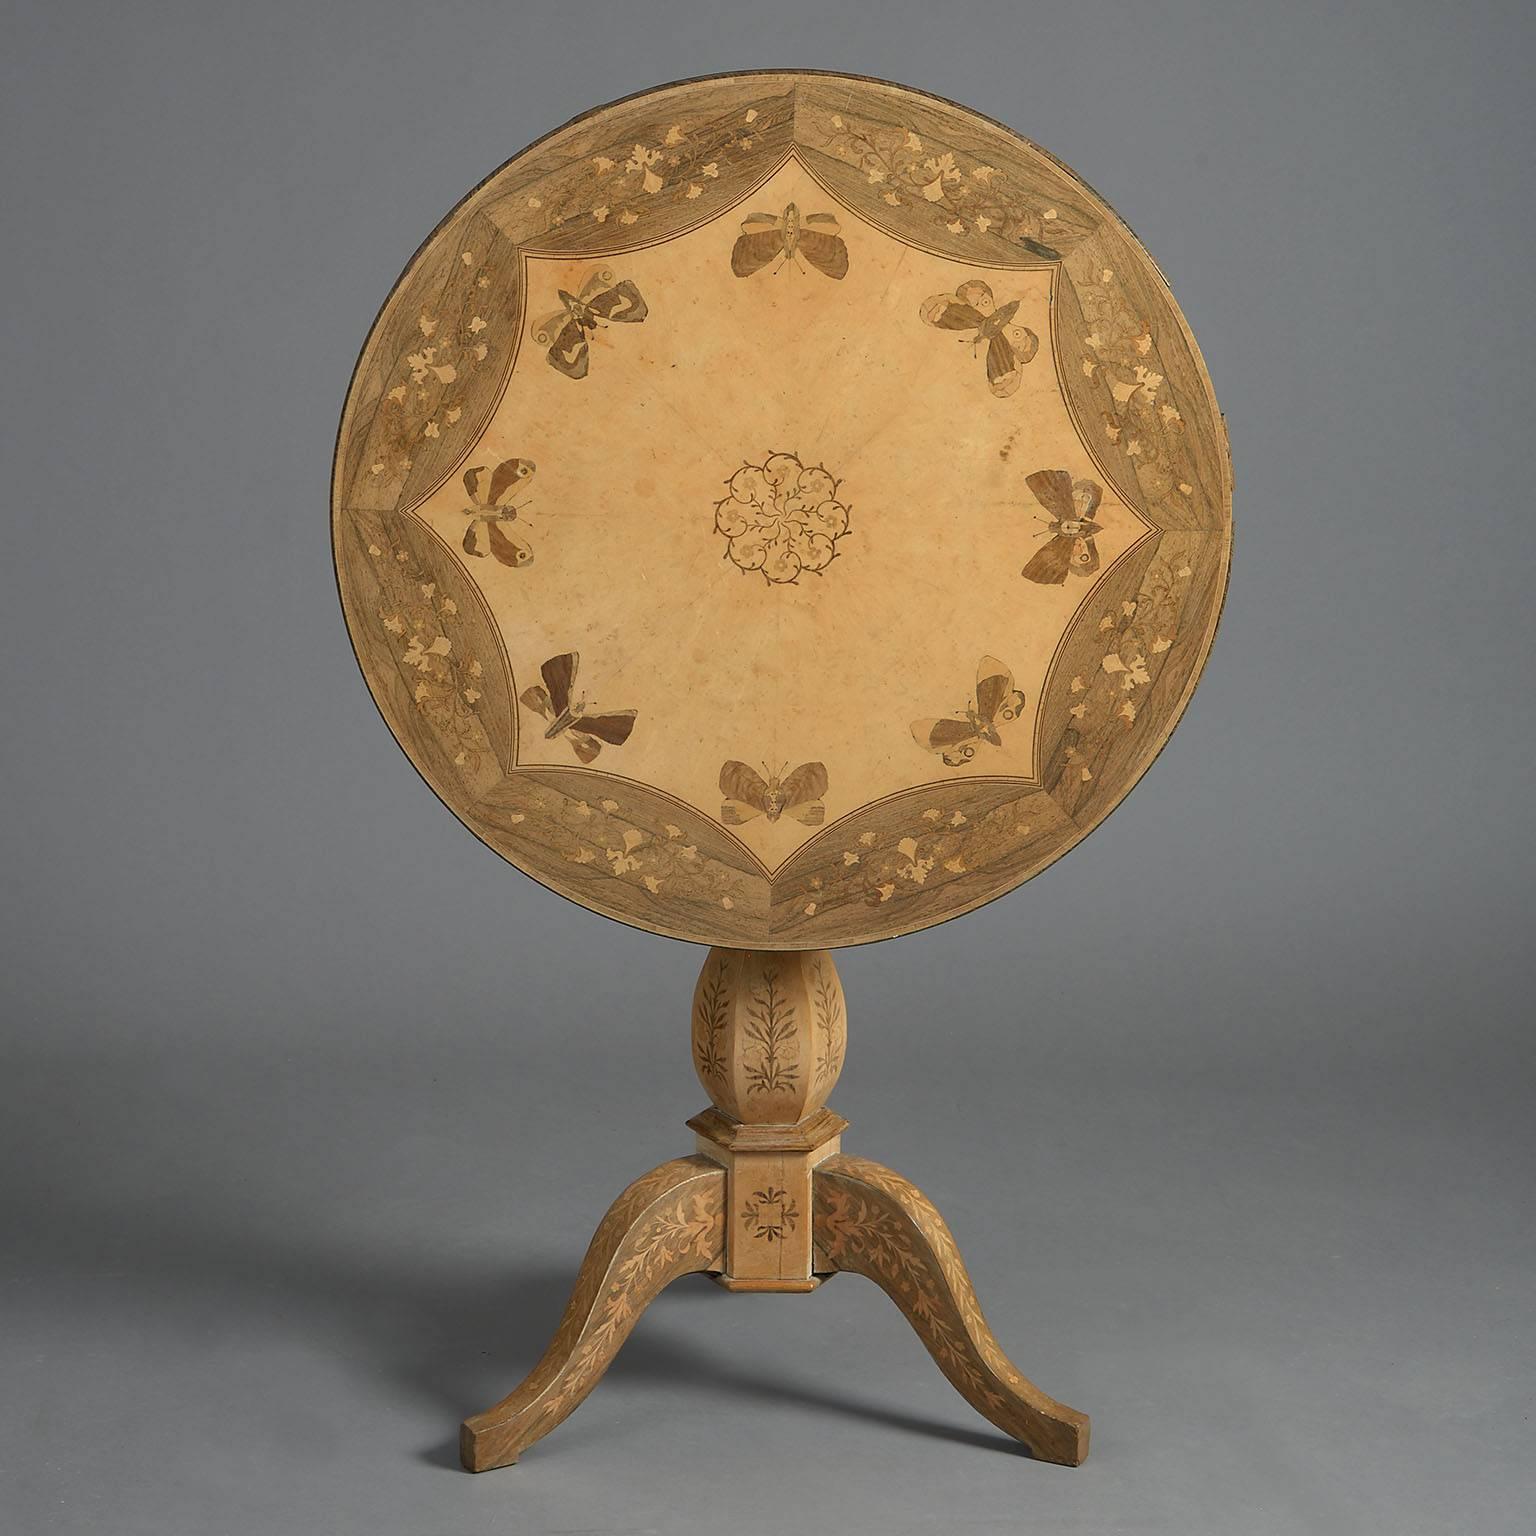 The circular top inlaid with butterflies and stylized foliage in Rosewood and other timbers on a bird's-eye maple ground and raised on a similarly-inlaid faceted baluster stem and tripod legs.

Despite it's tantalizing inscription, neither this